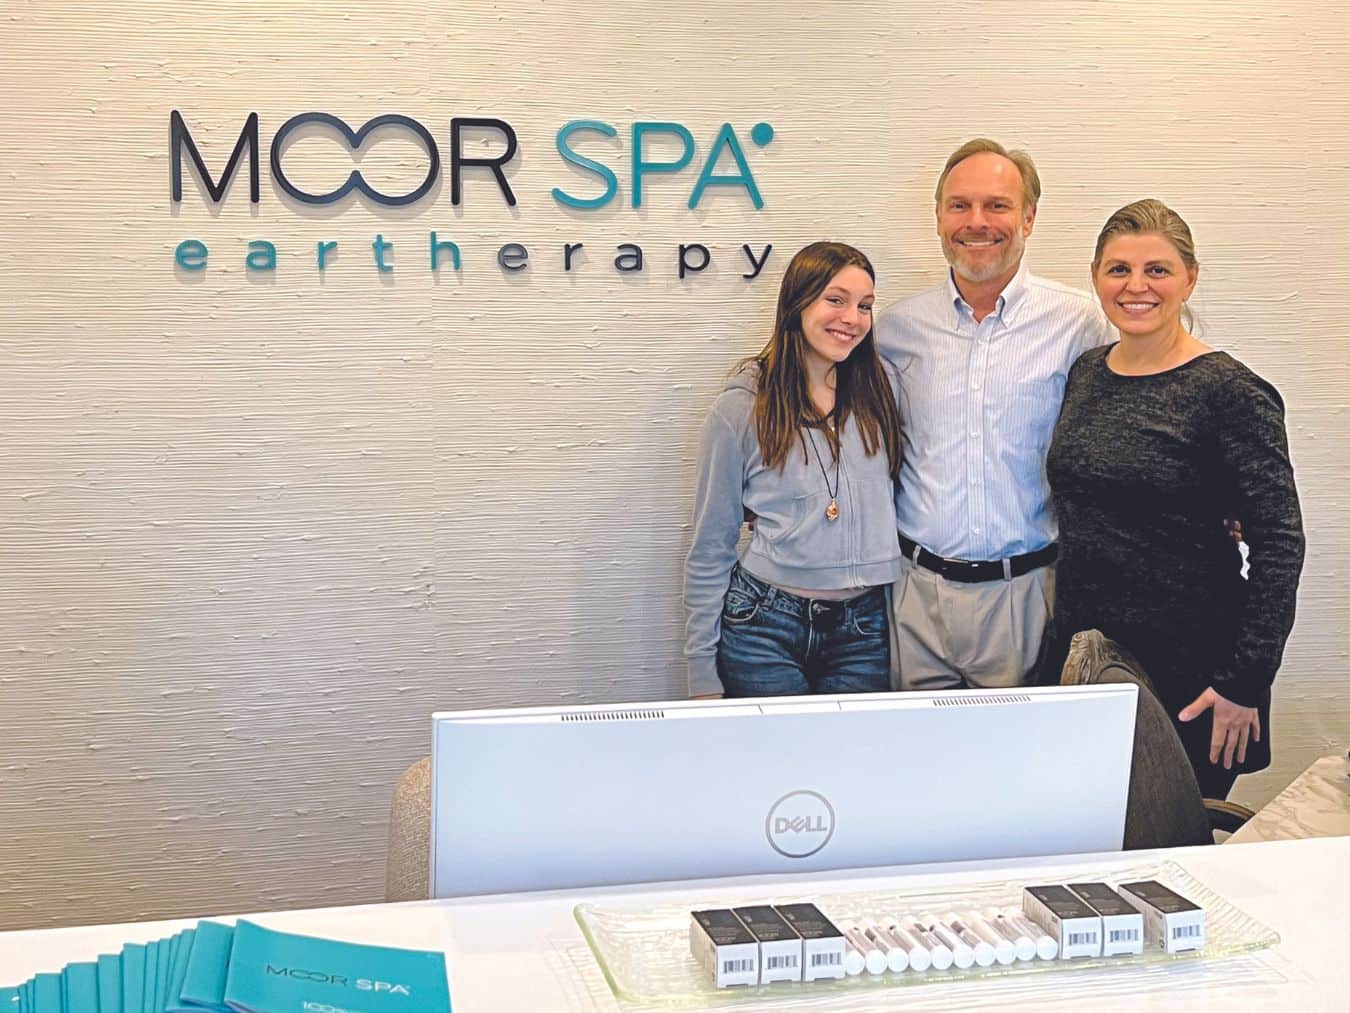 The owners of Moor Spa Hilton Head Island, SC